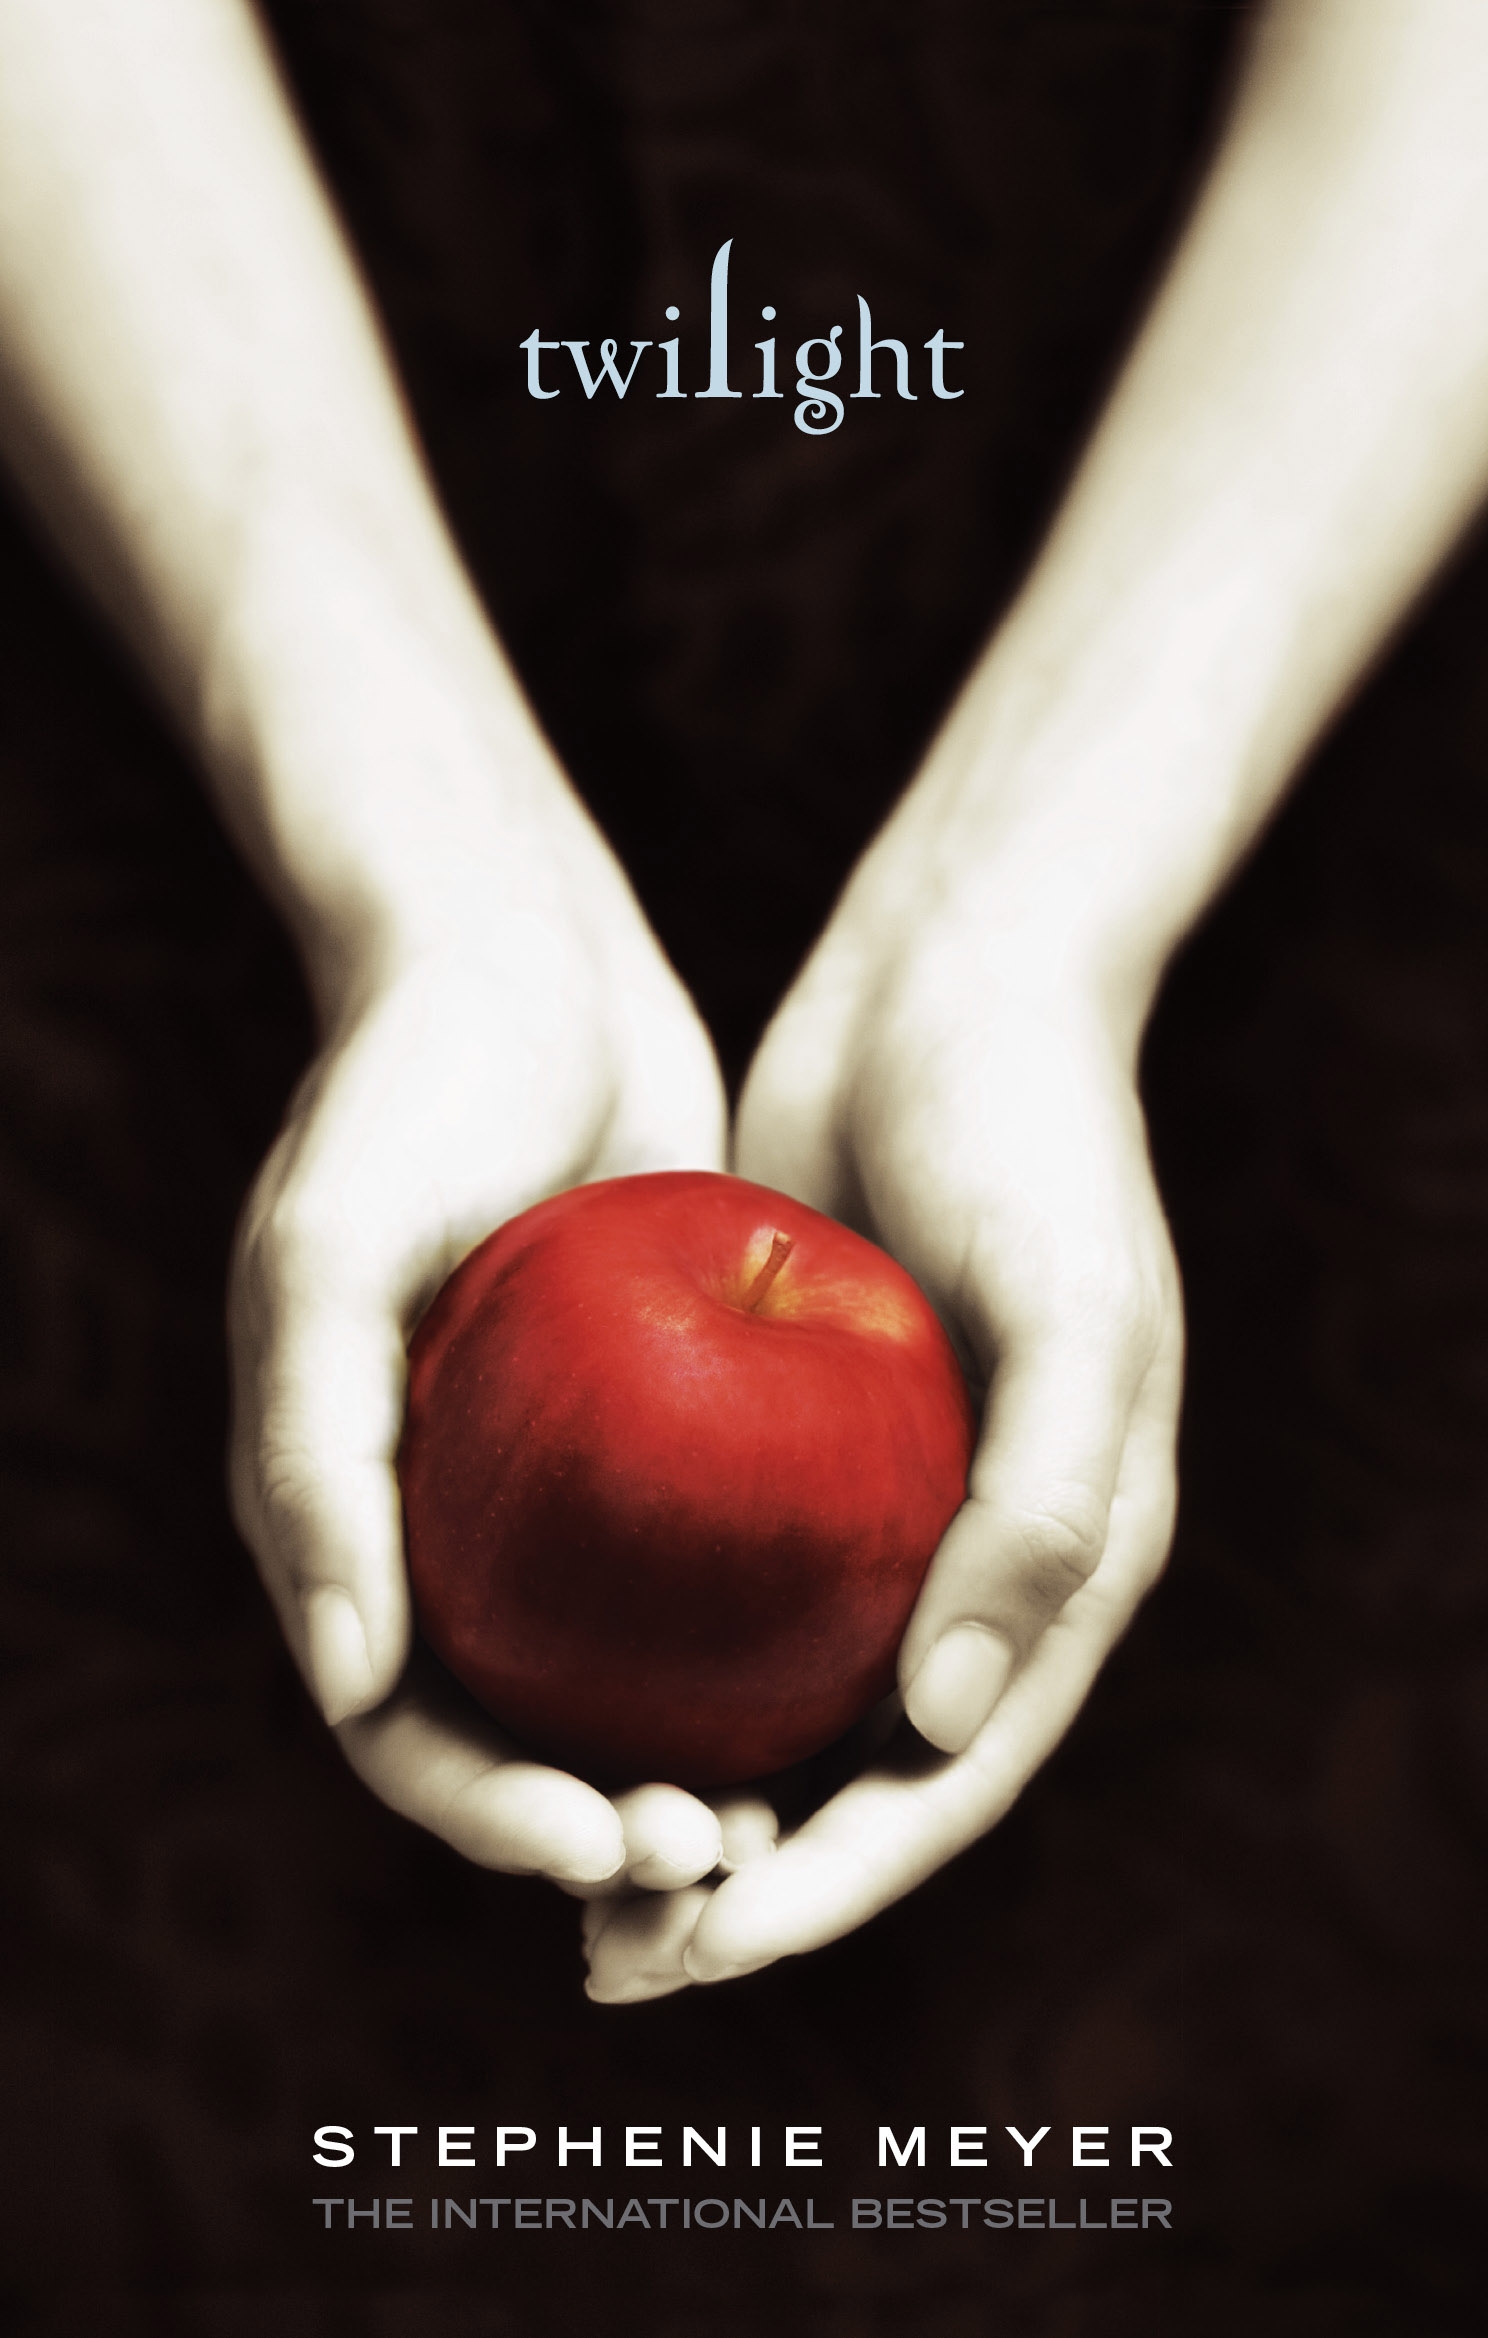 Twilight (series), by Stephenie Meyer.
                              
                              
                              
                              Bella Swan discovers her crush comes with more complications than the average teen romance—her beau, Edward Cullen, is a vampire. 
                              
                              
                              
                              Buy now: Twilight (series)